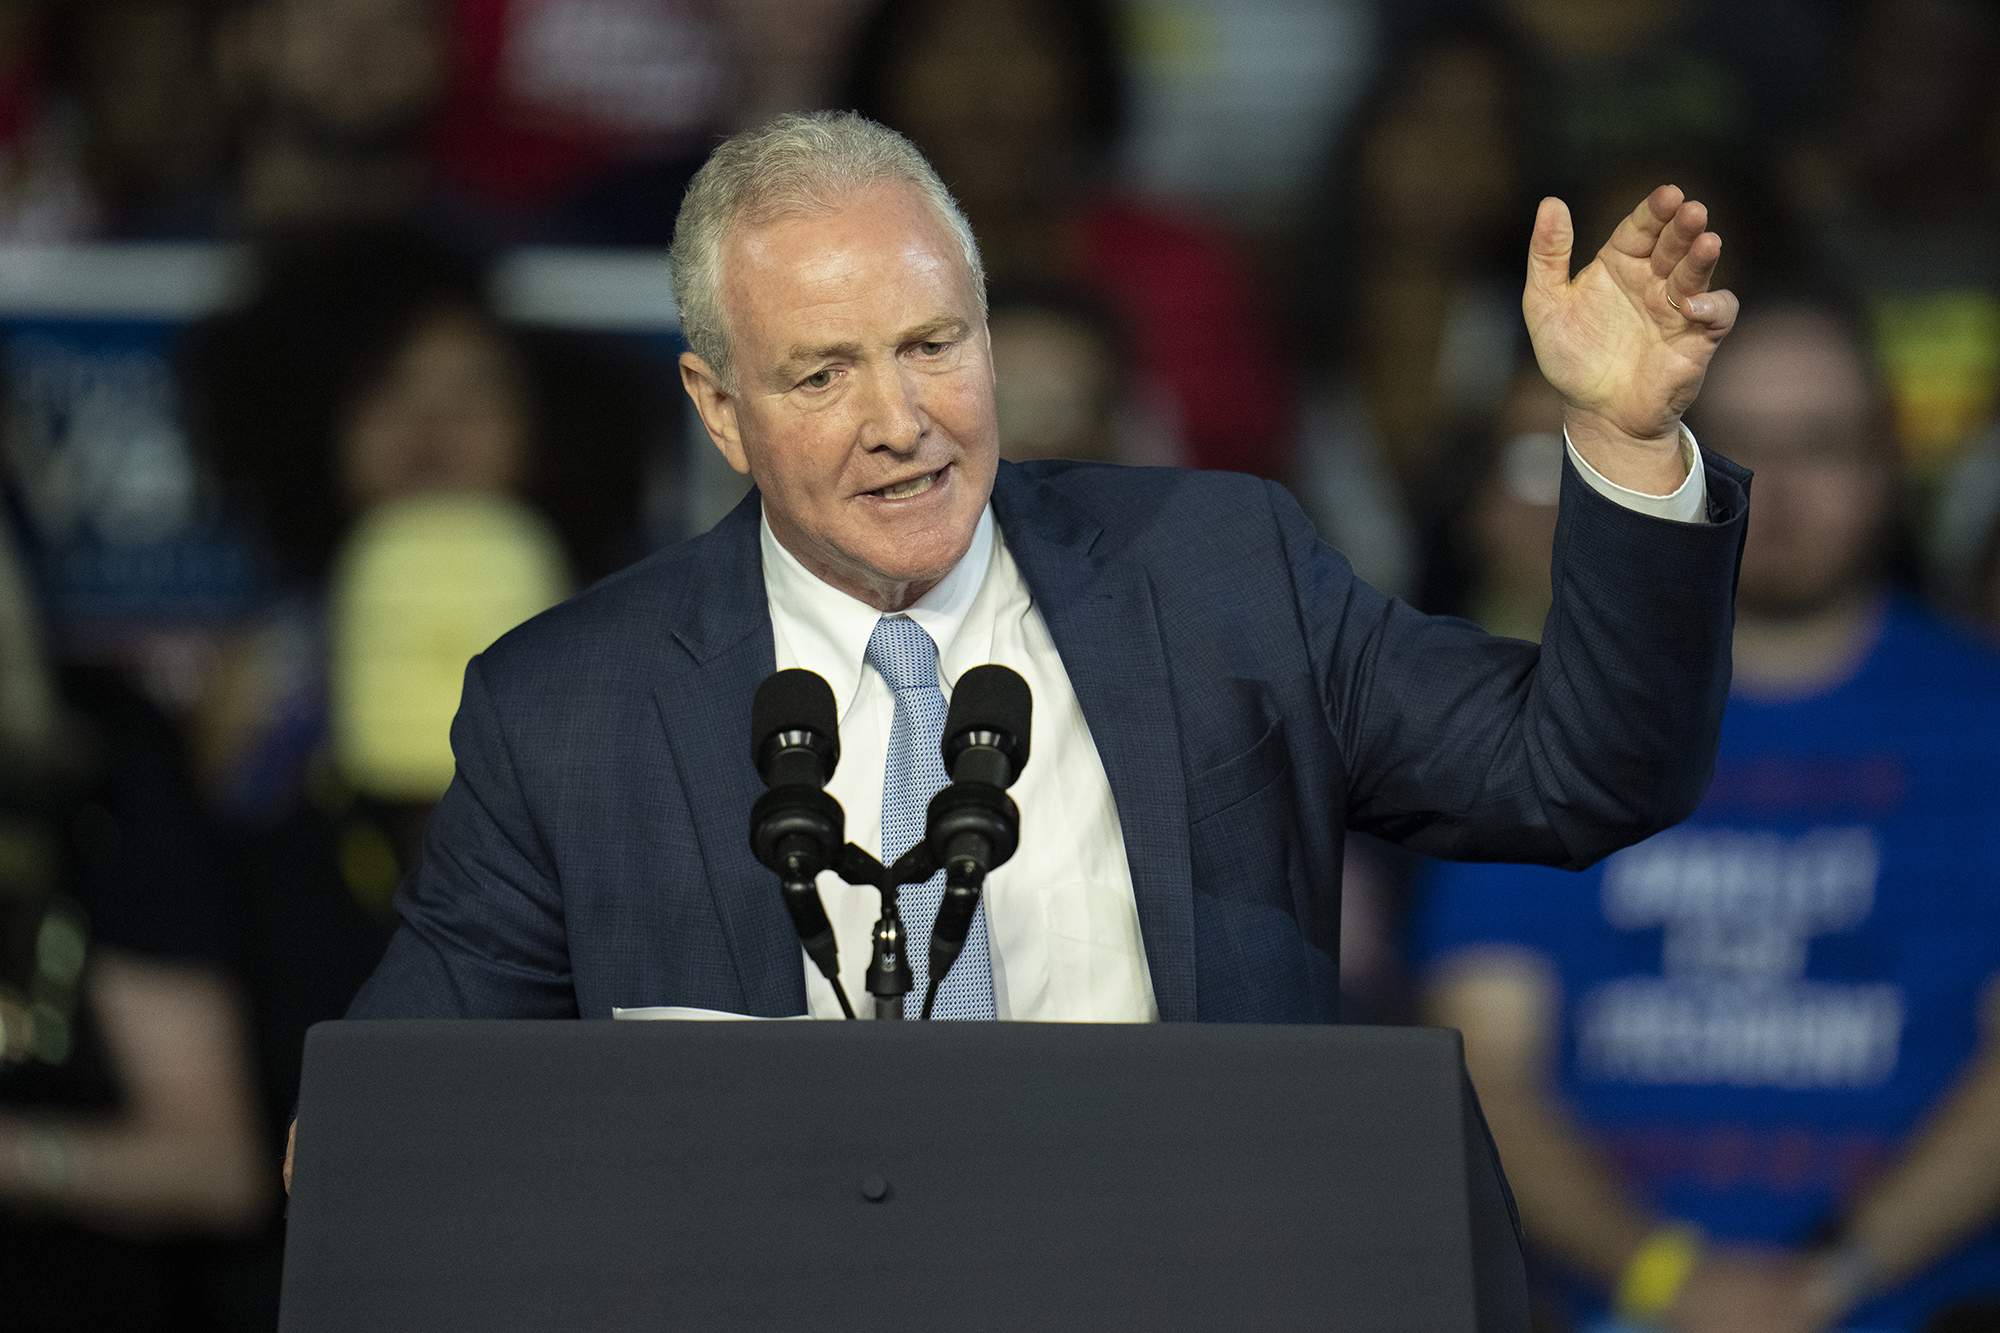 Sen. Chris Van Hollen speaks during an event at Bowie State University in Bowie, Maryland, on Monday.